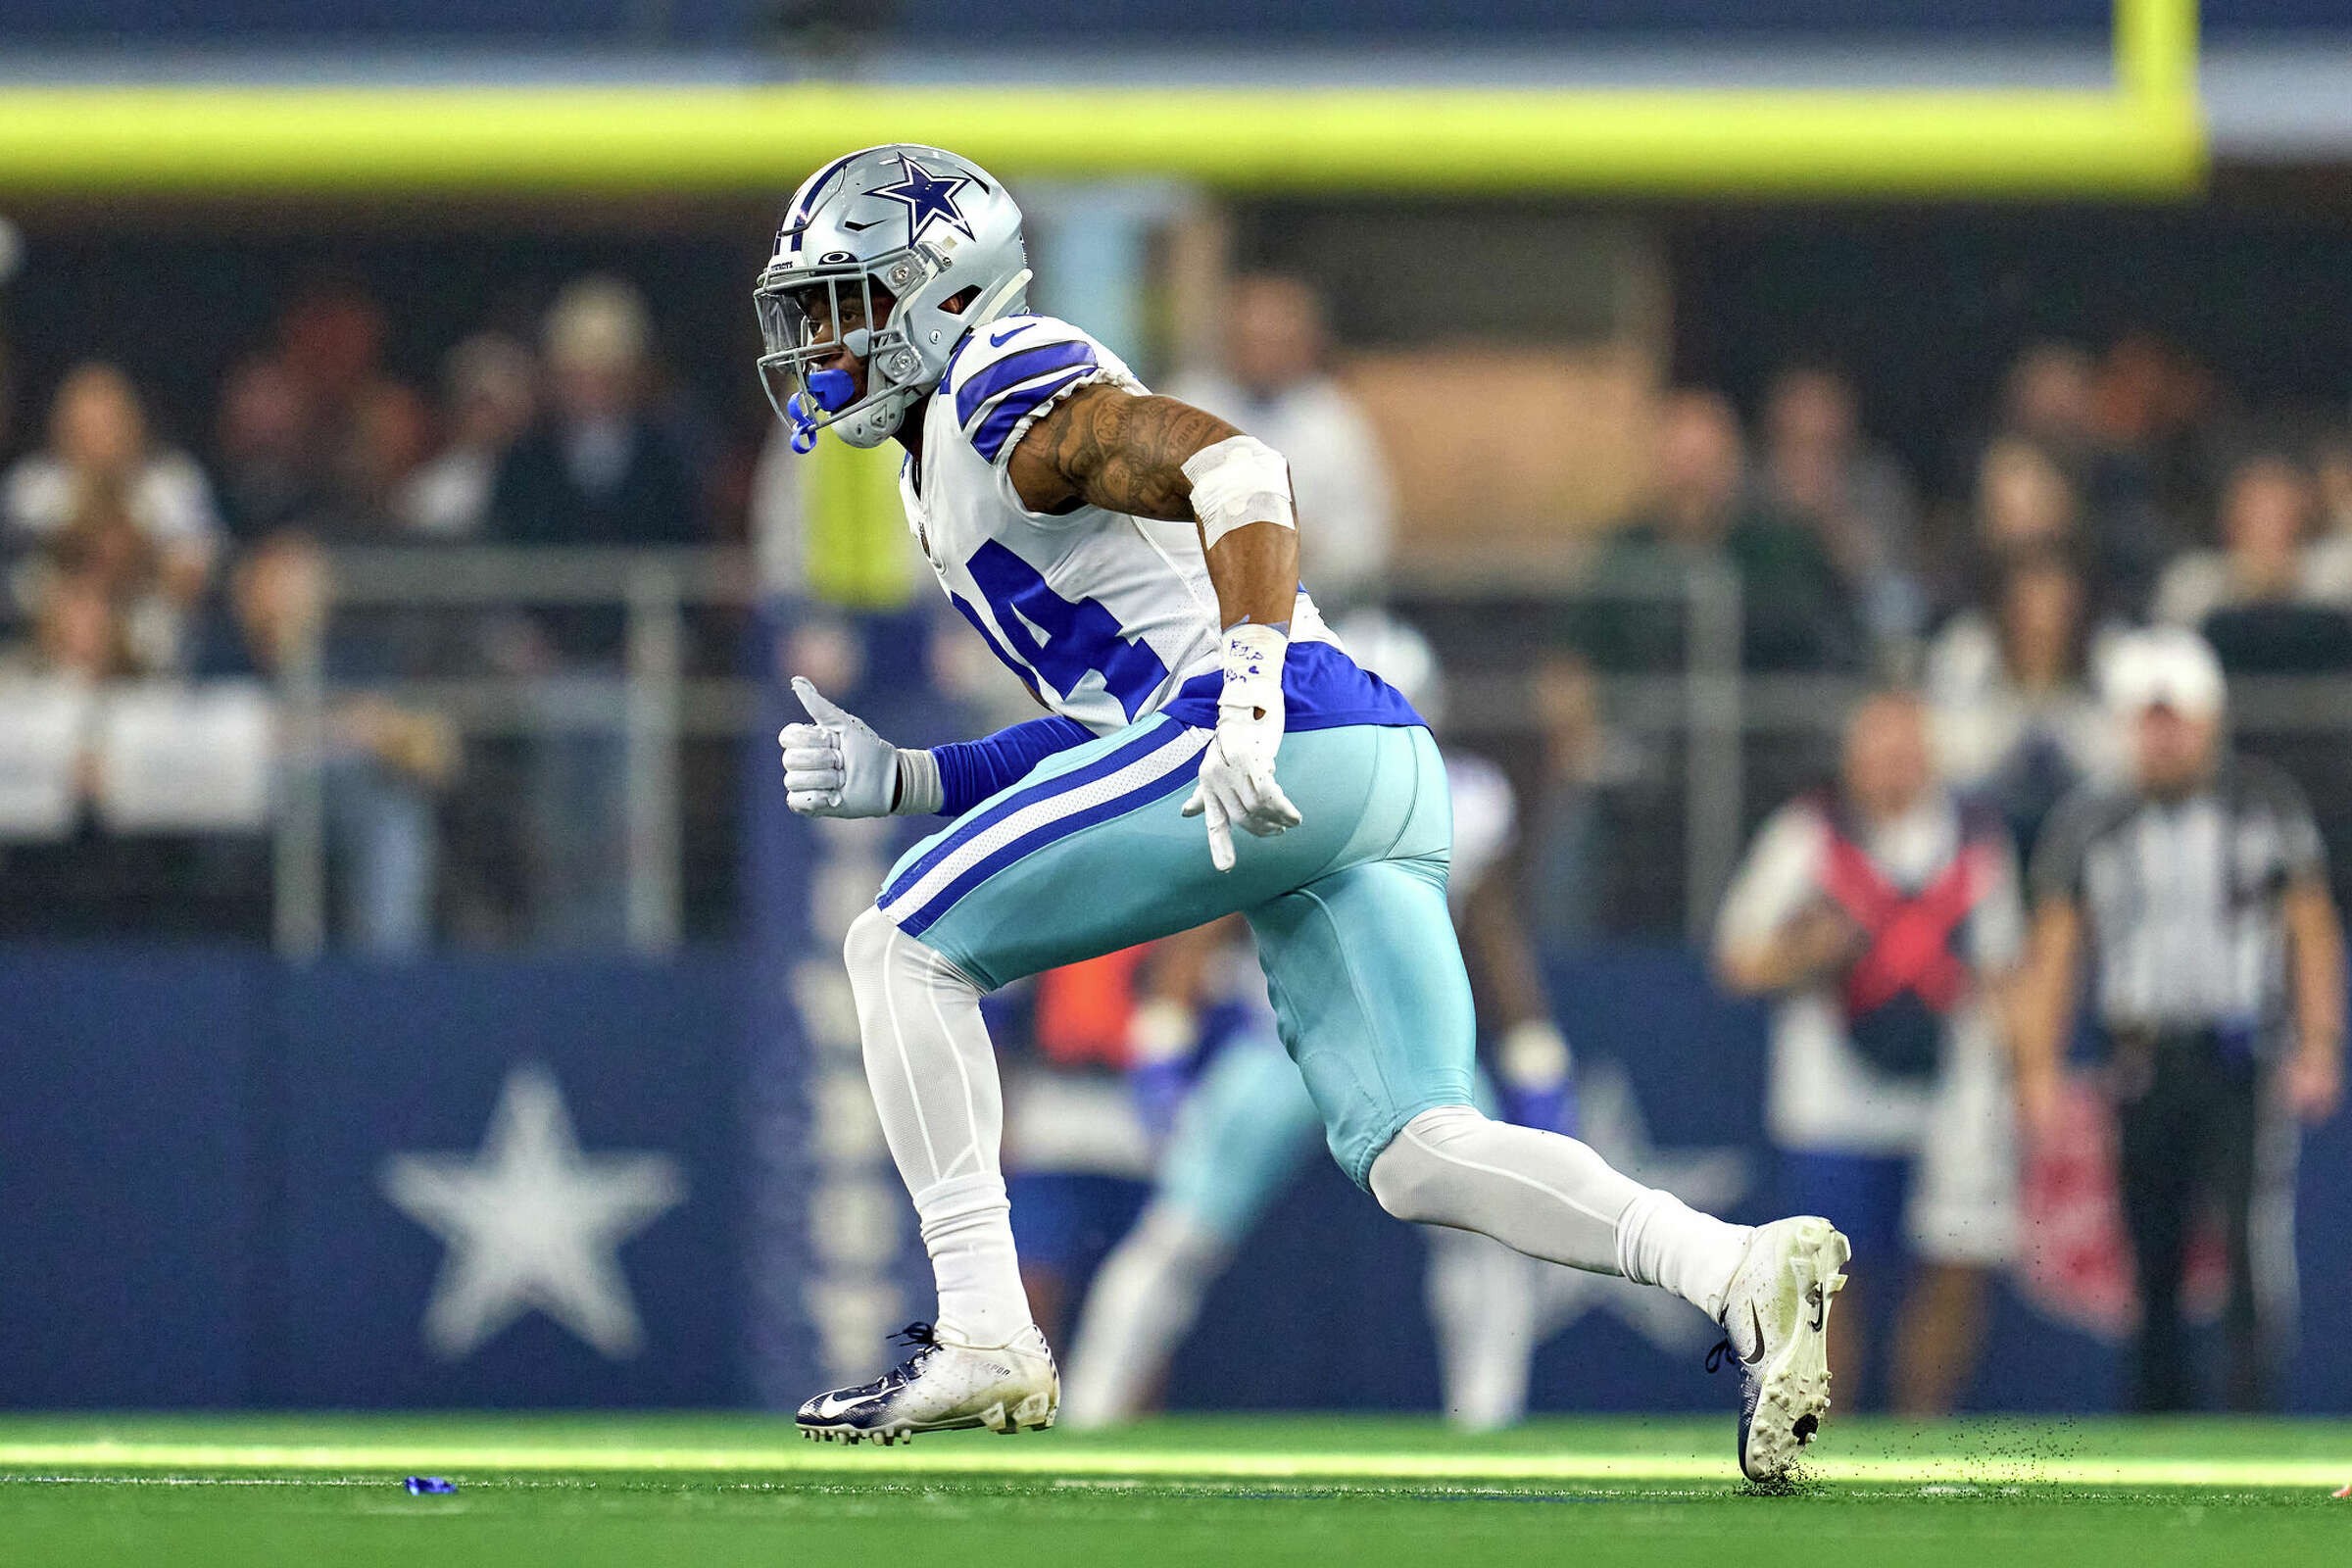 Cowboys cornerback Kelvin Joseph wanted for questioning about